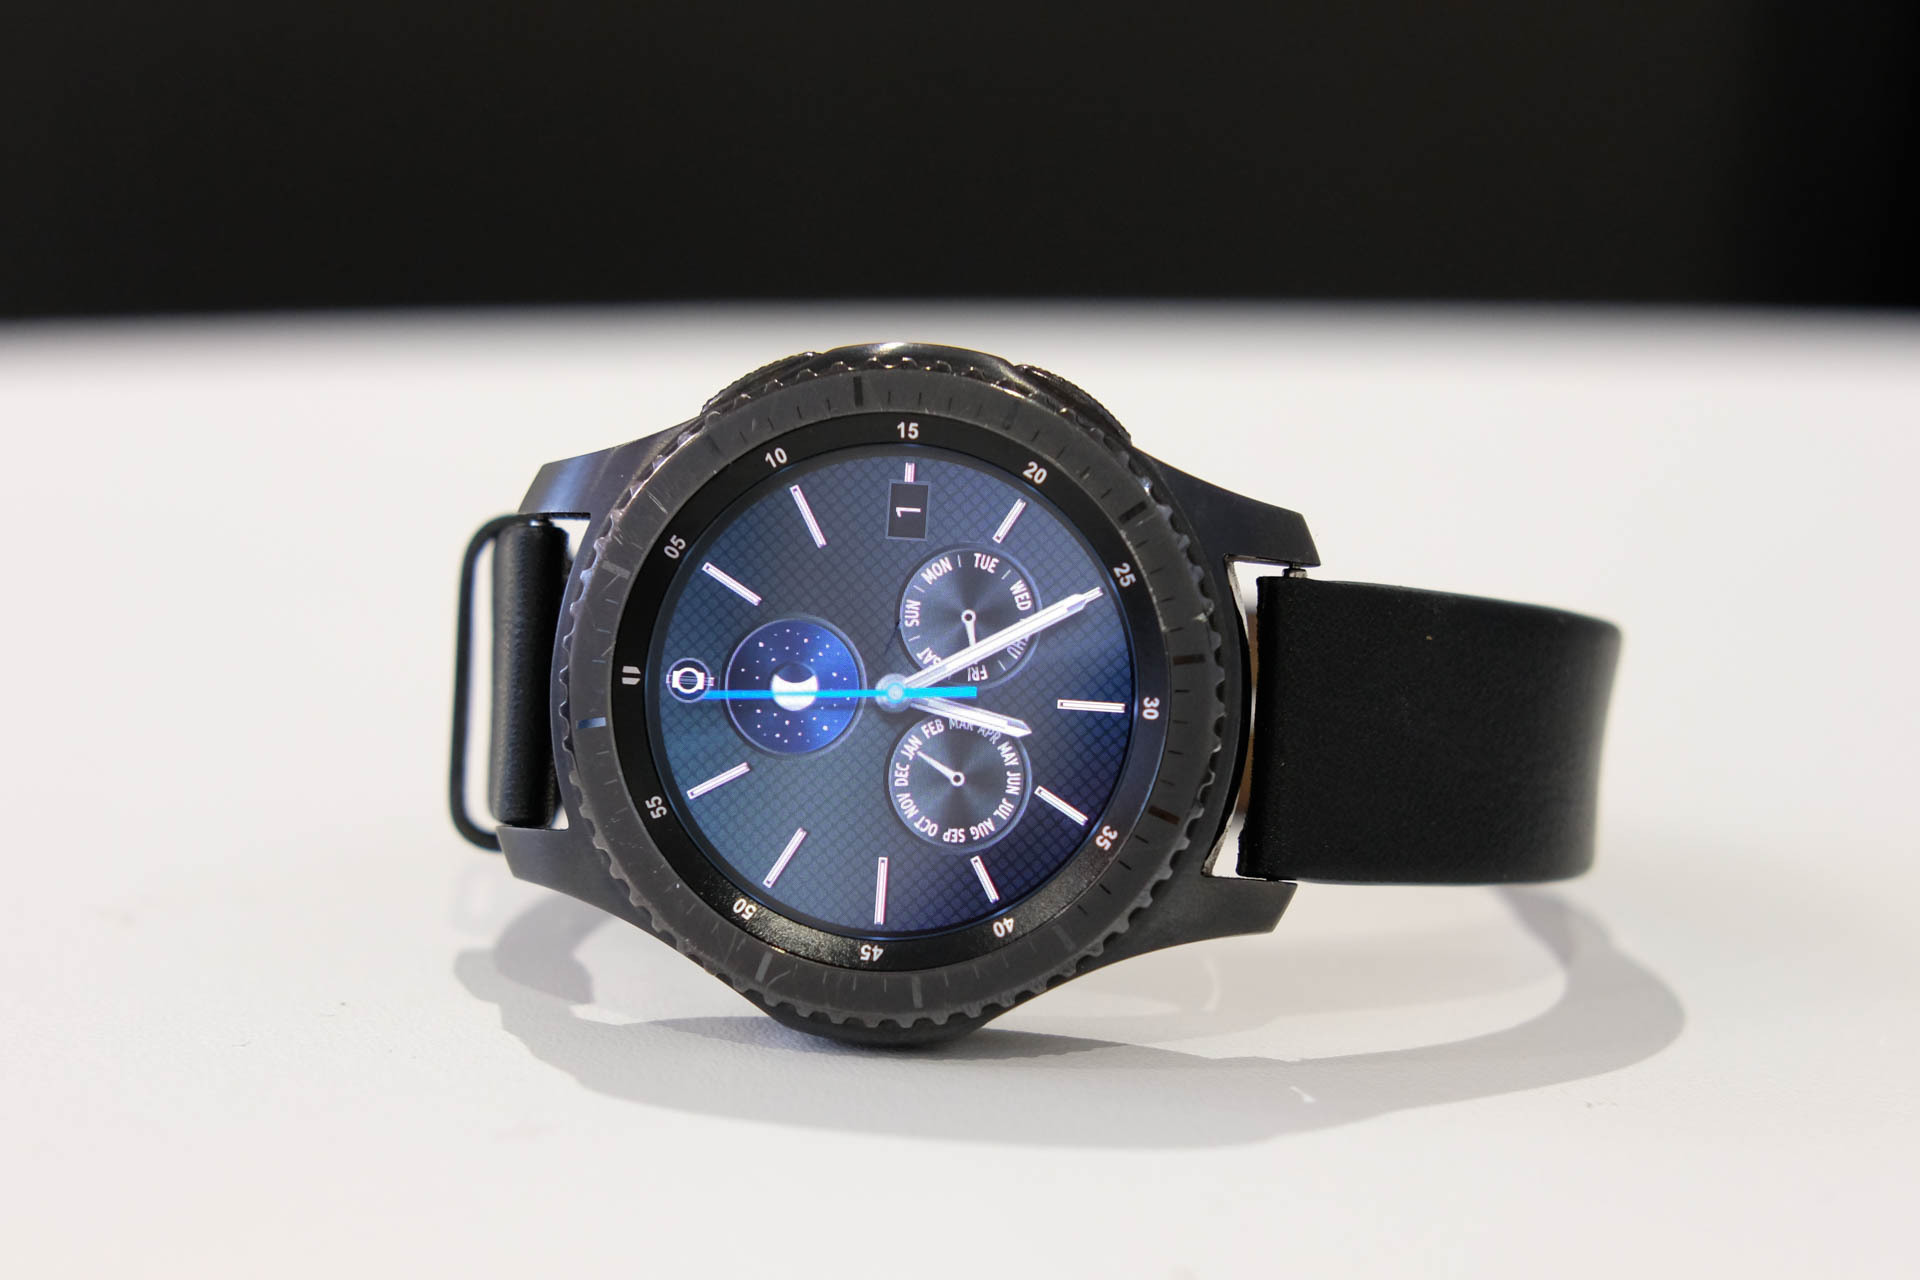 samsung gear s3 review 2019